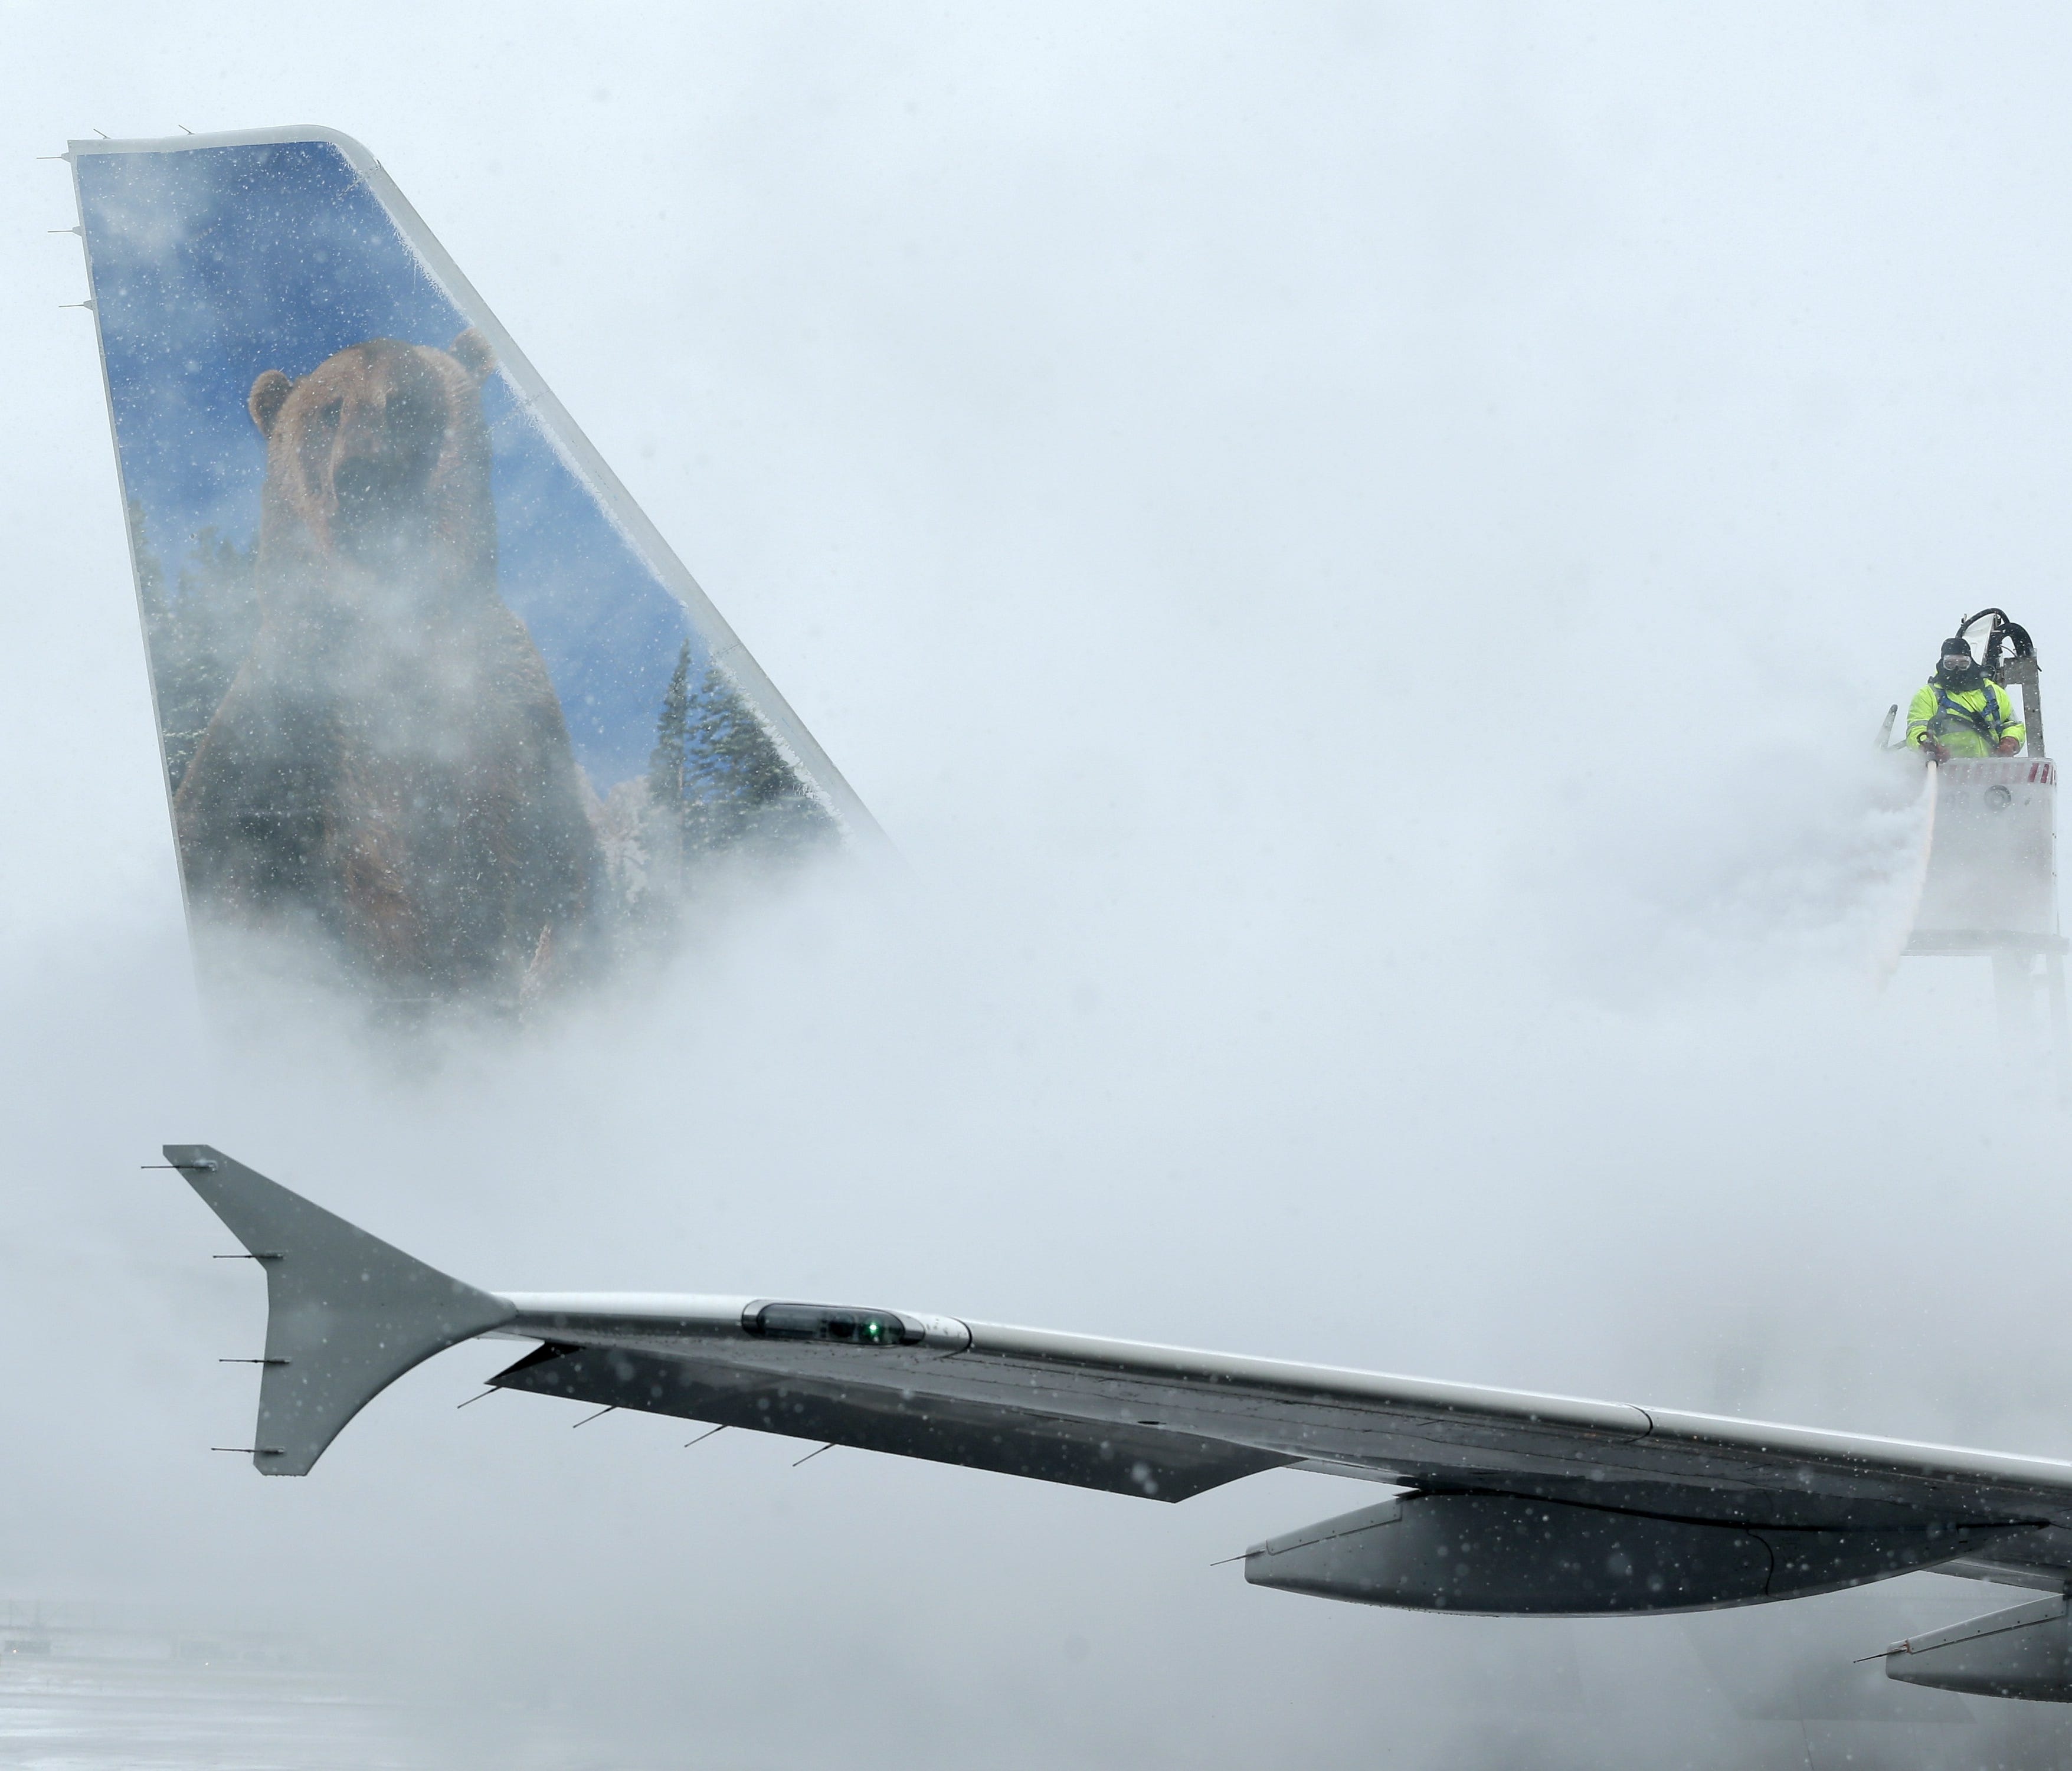 This file photo from Jan. 26, 2015, shows a crewmember de-icing a Frontier Airlines plane at LaGuardia Airport in New York.